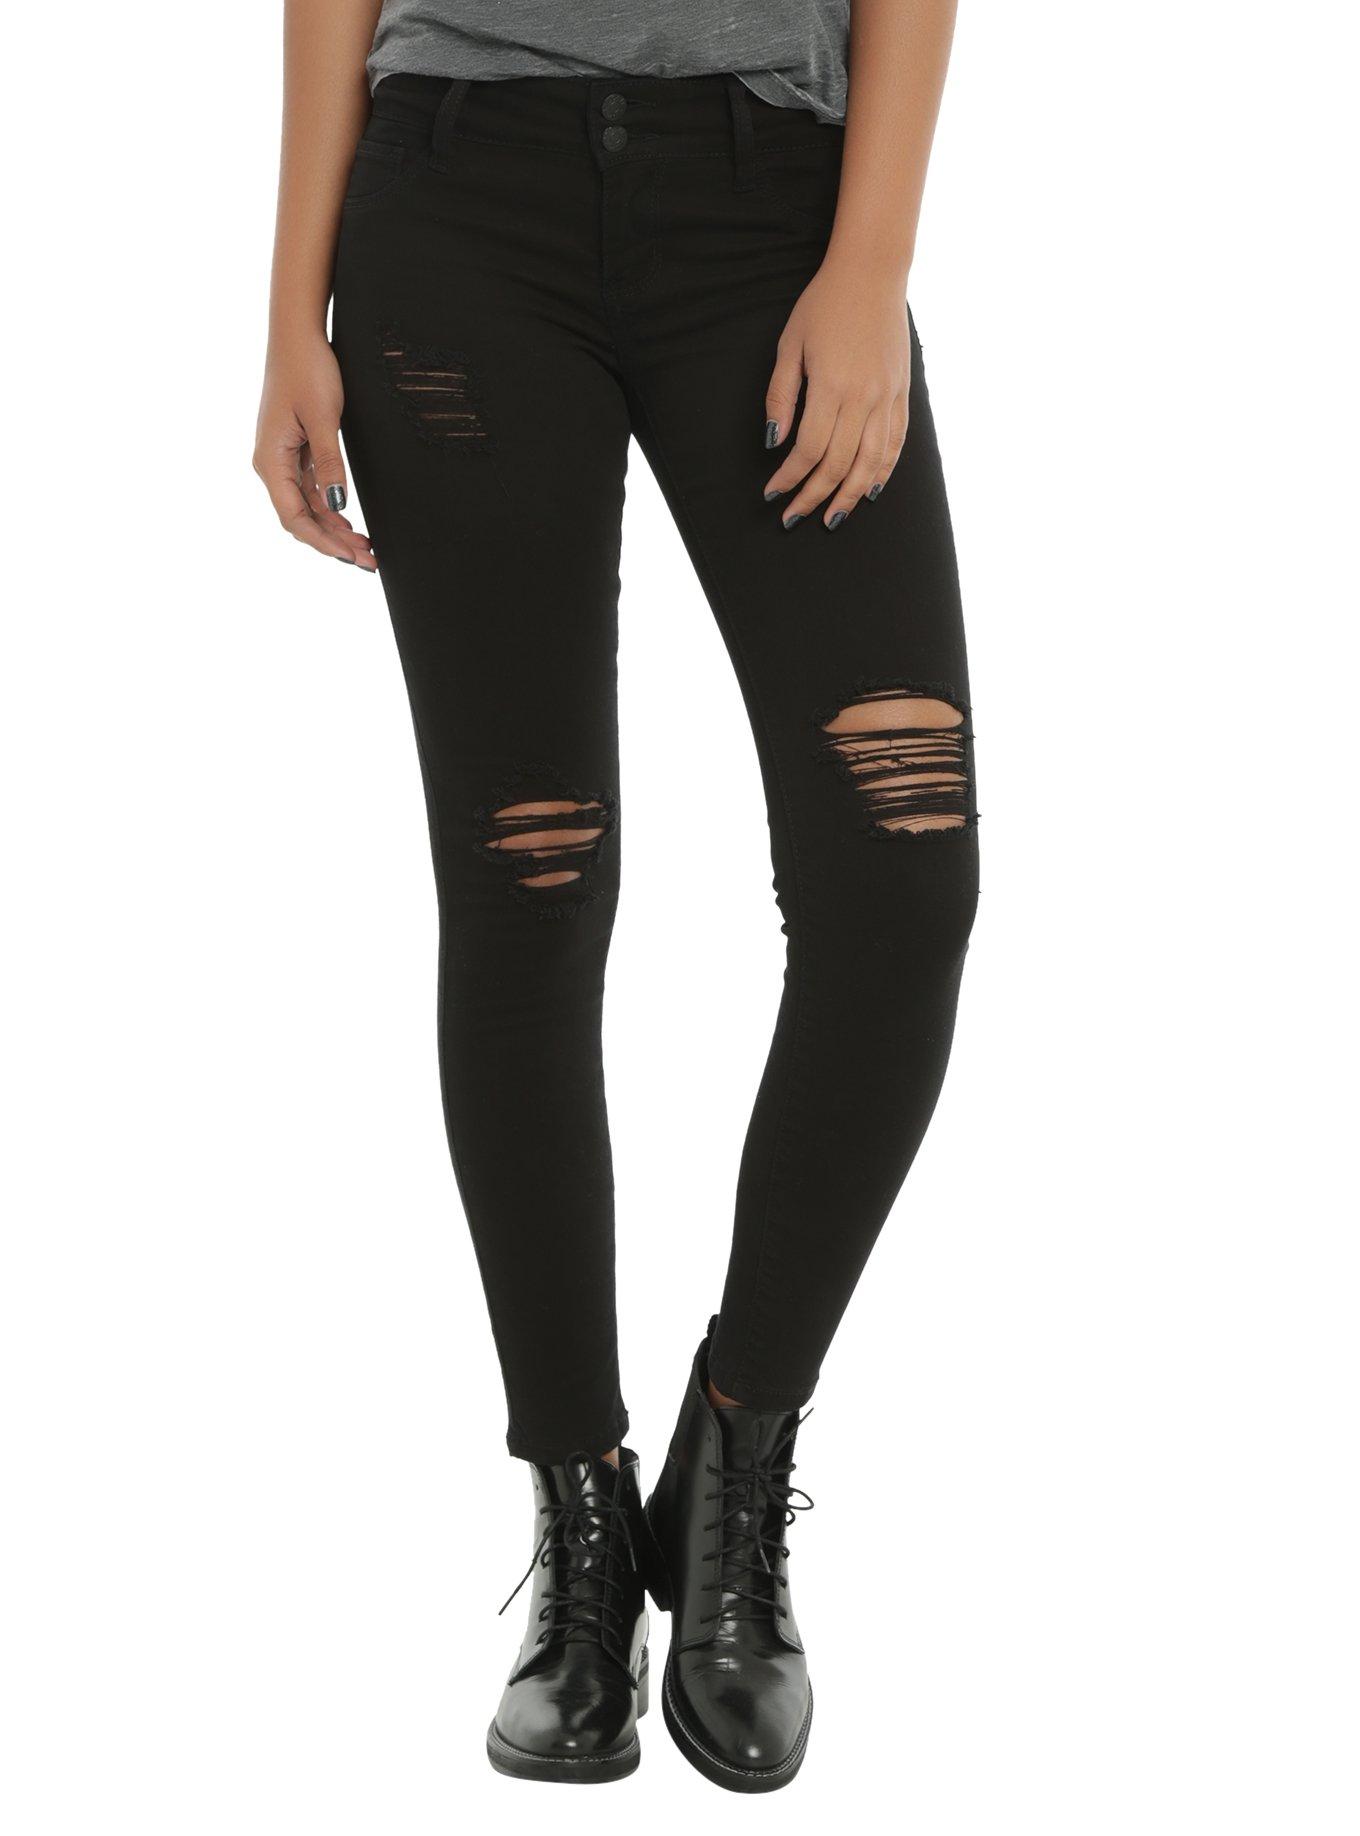 Black Deconstructed Skinny Jeans | Hot Topic